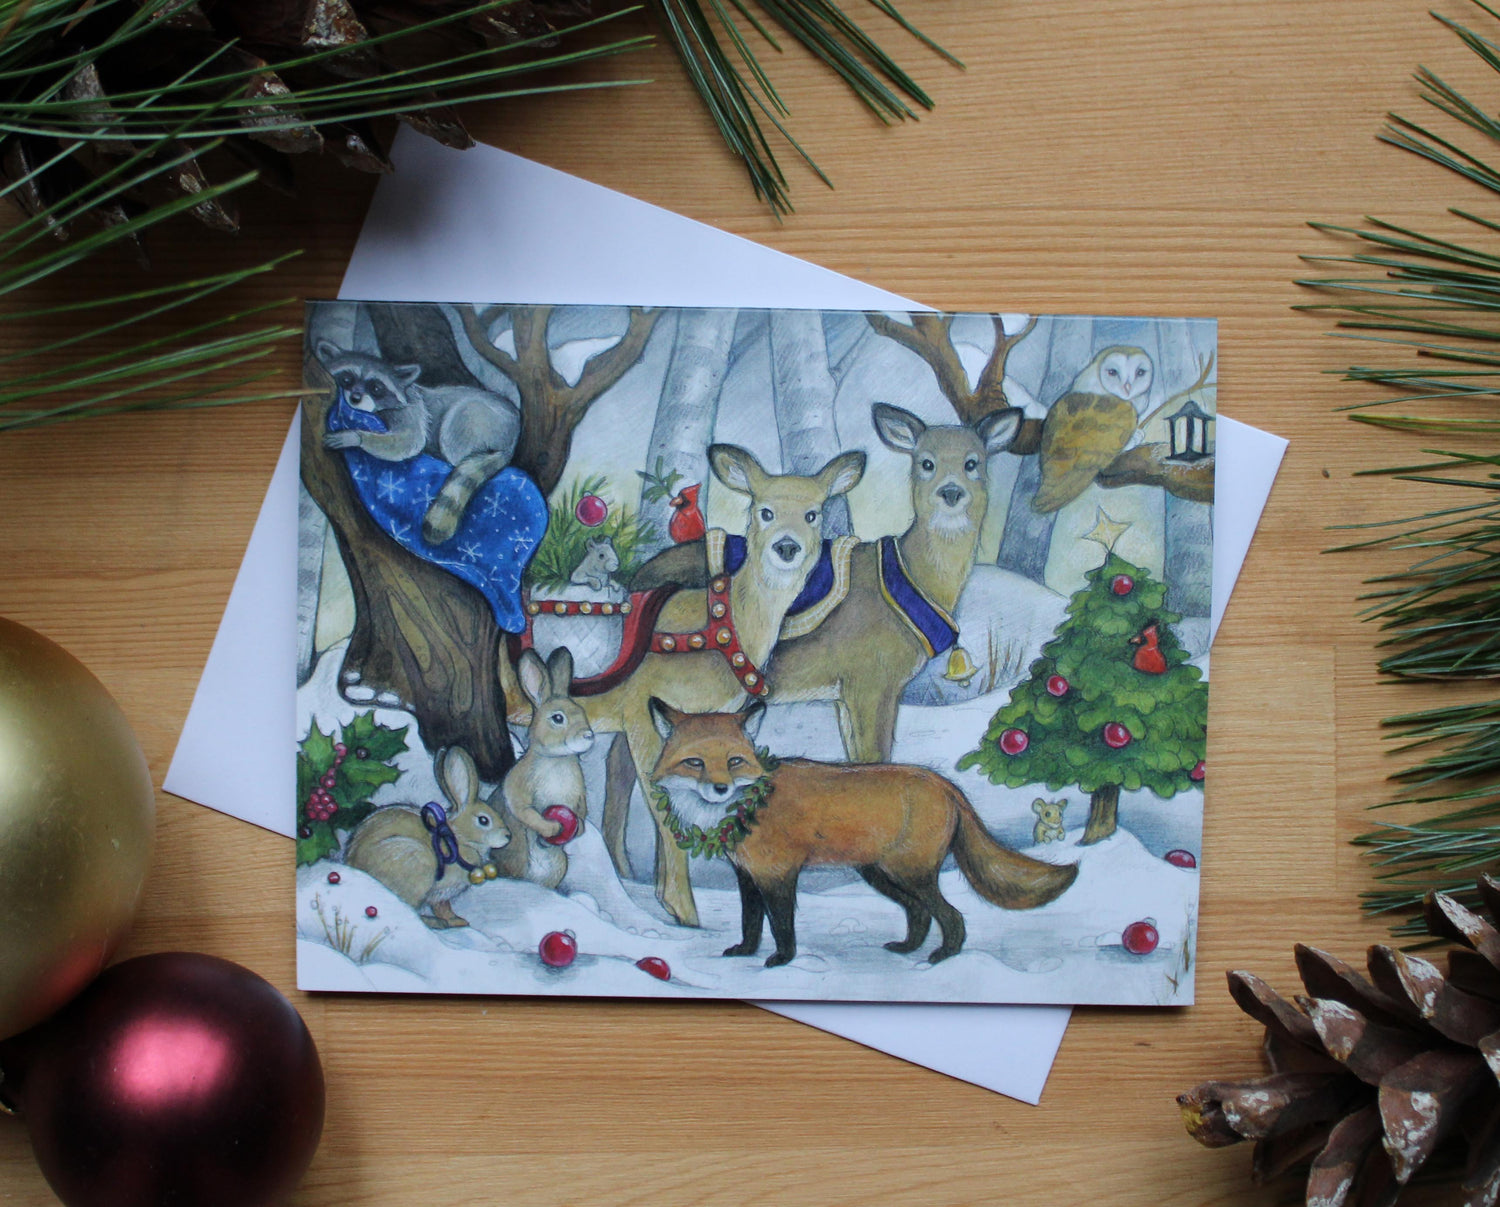 illustrated christmas card of forest animals gathered together to celebrate the holiday season.